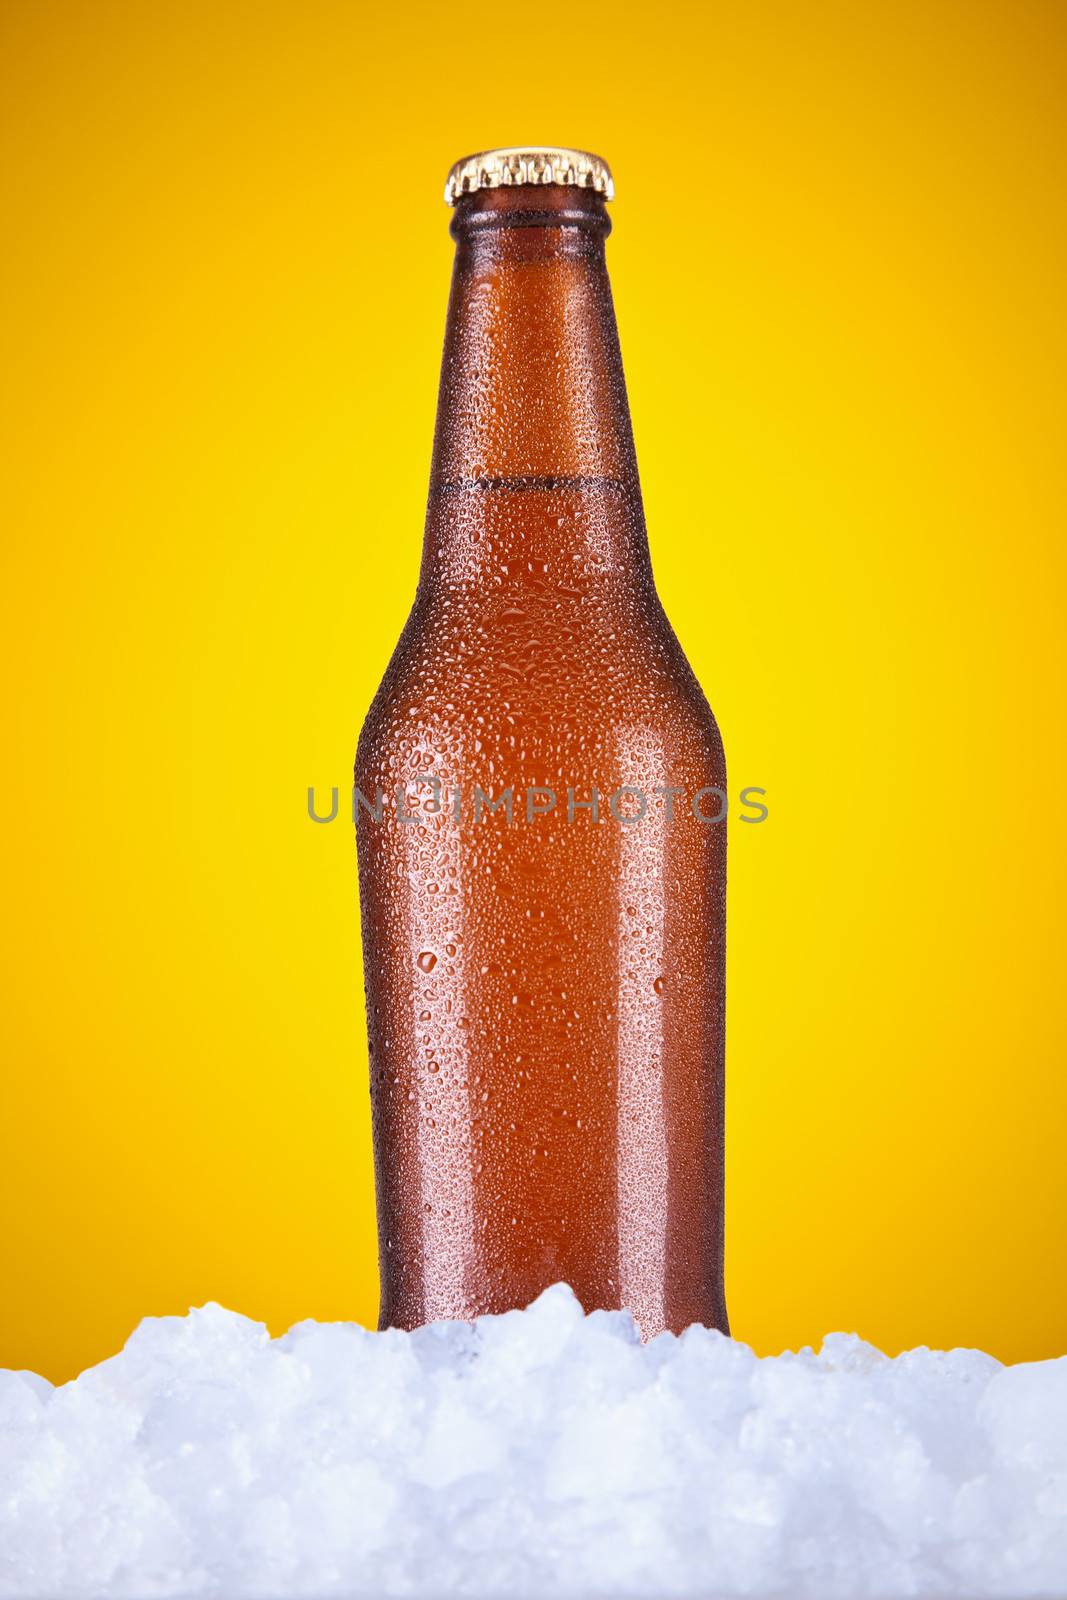 A beer bottle sitting on ice over a yellow background.